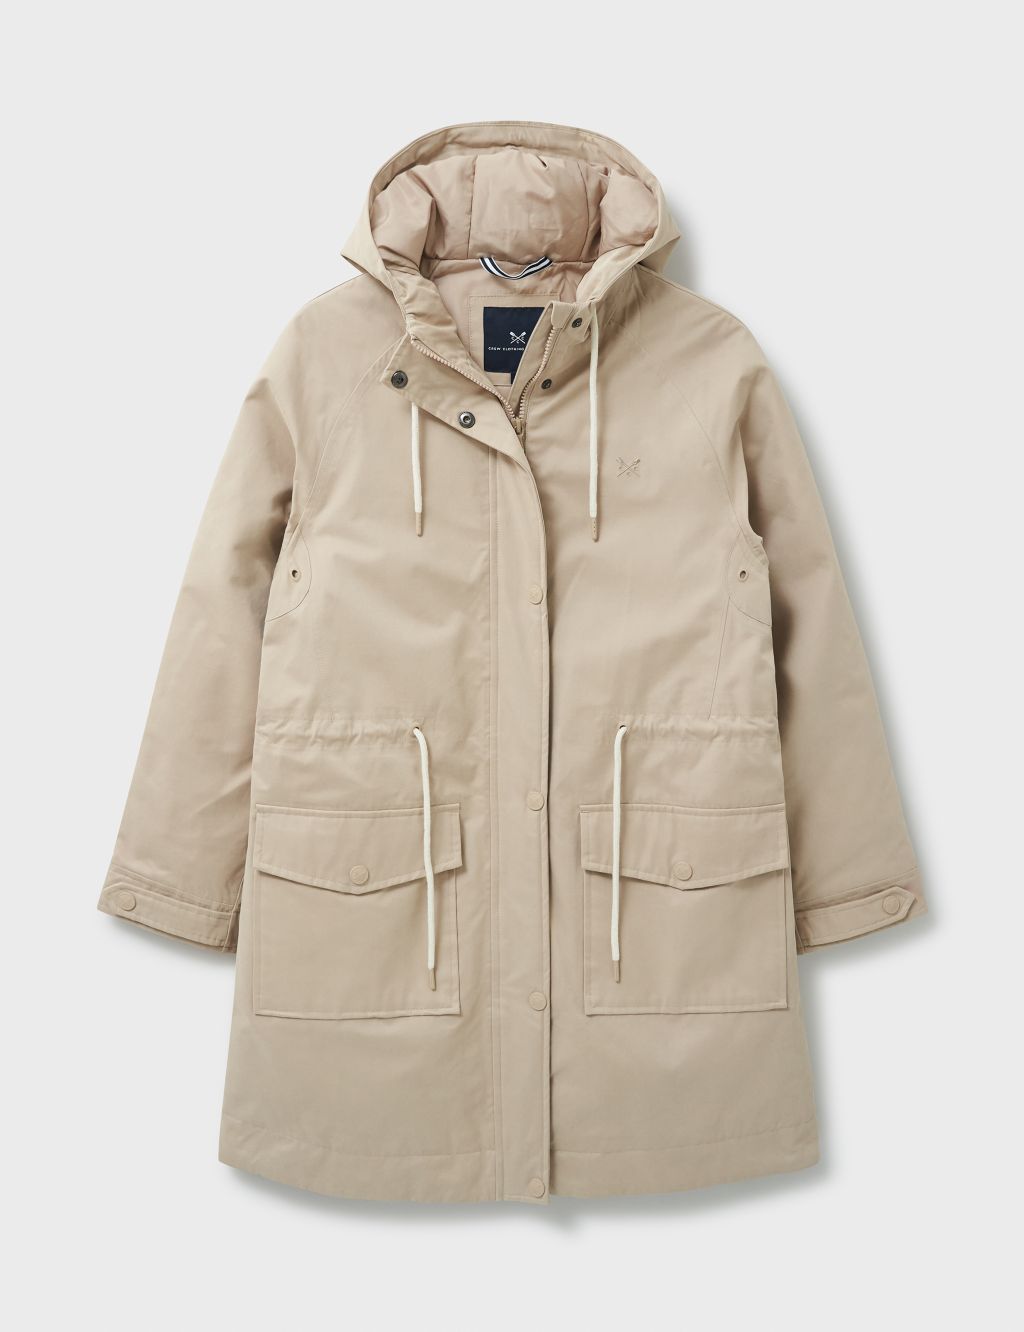 Cotton Blend Waterproof Hooded Parka Coat | Crew Clothing | M&S